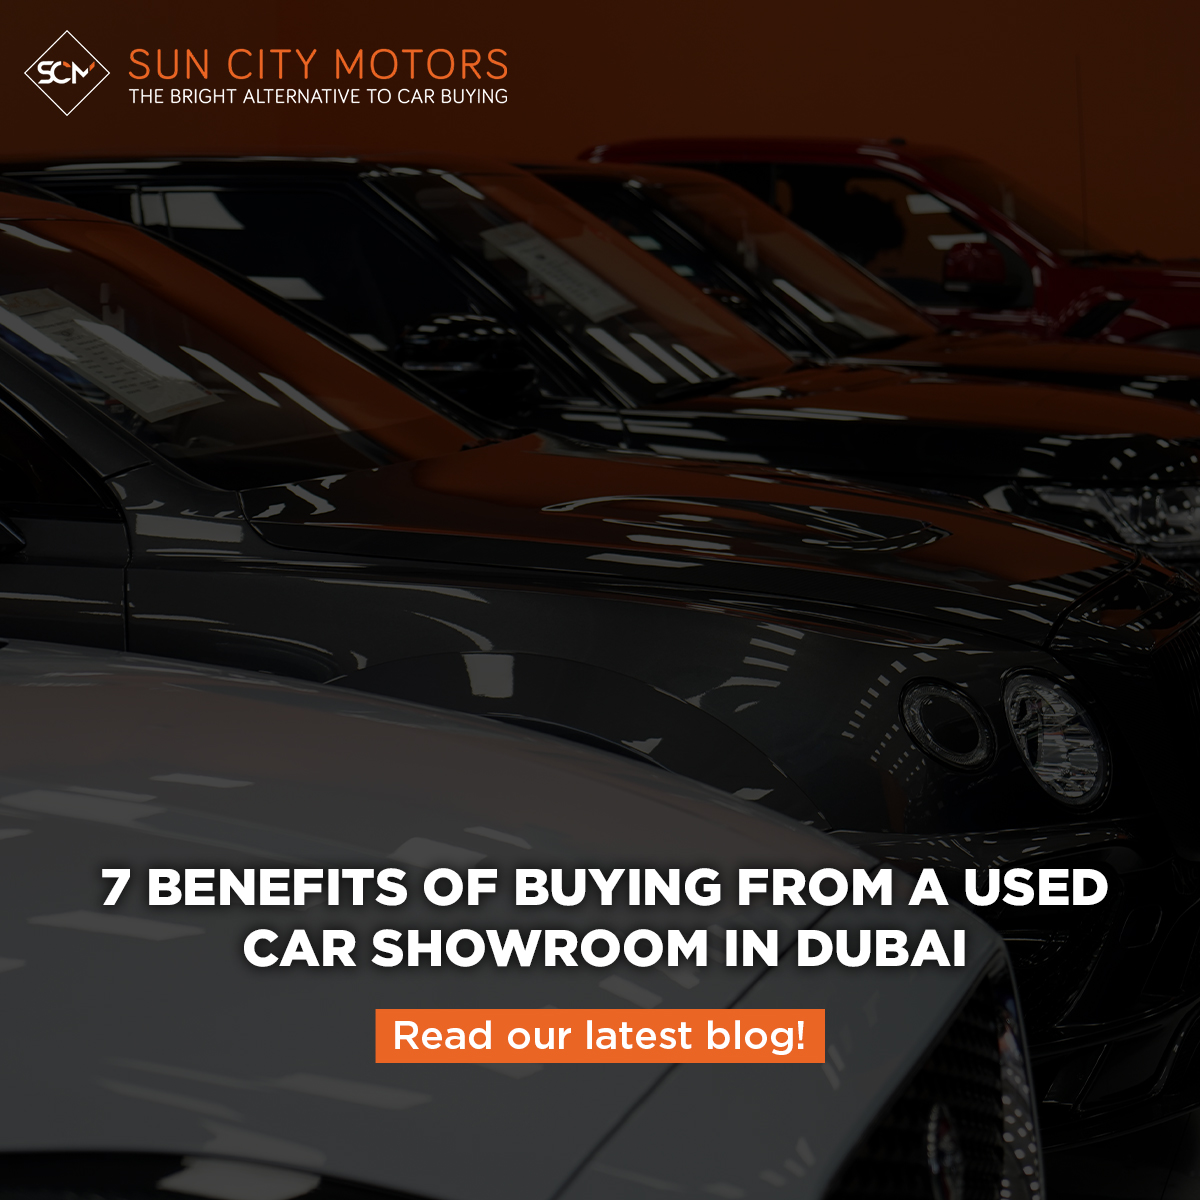 7 Benefits of Buying From a Used Car Showroom in Dubai